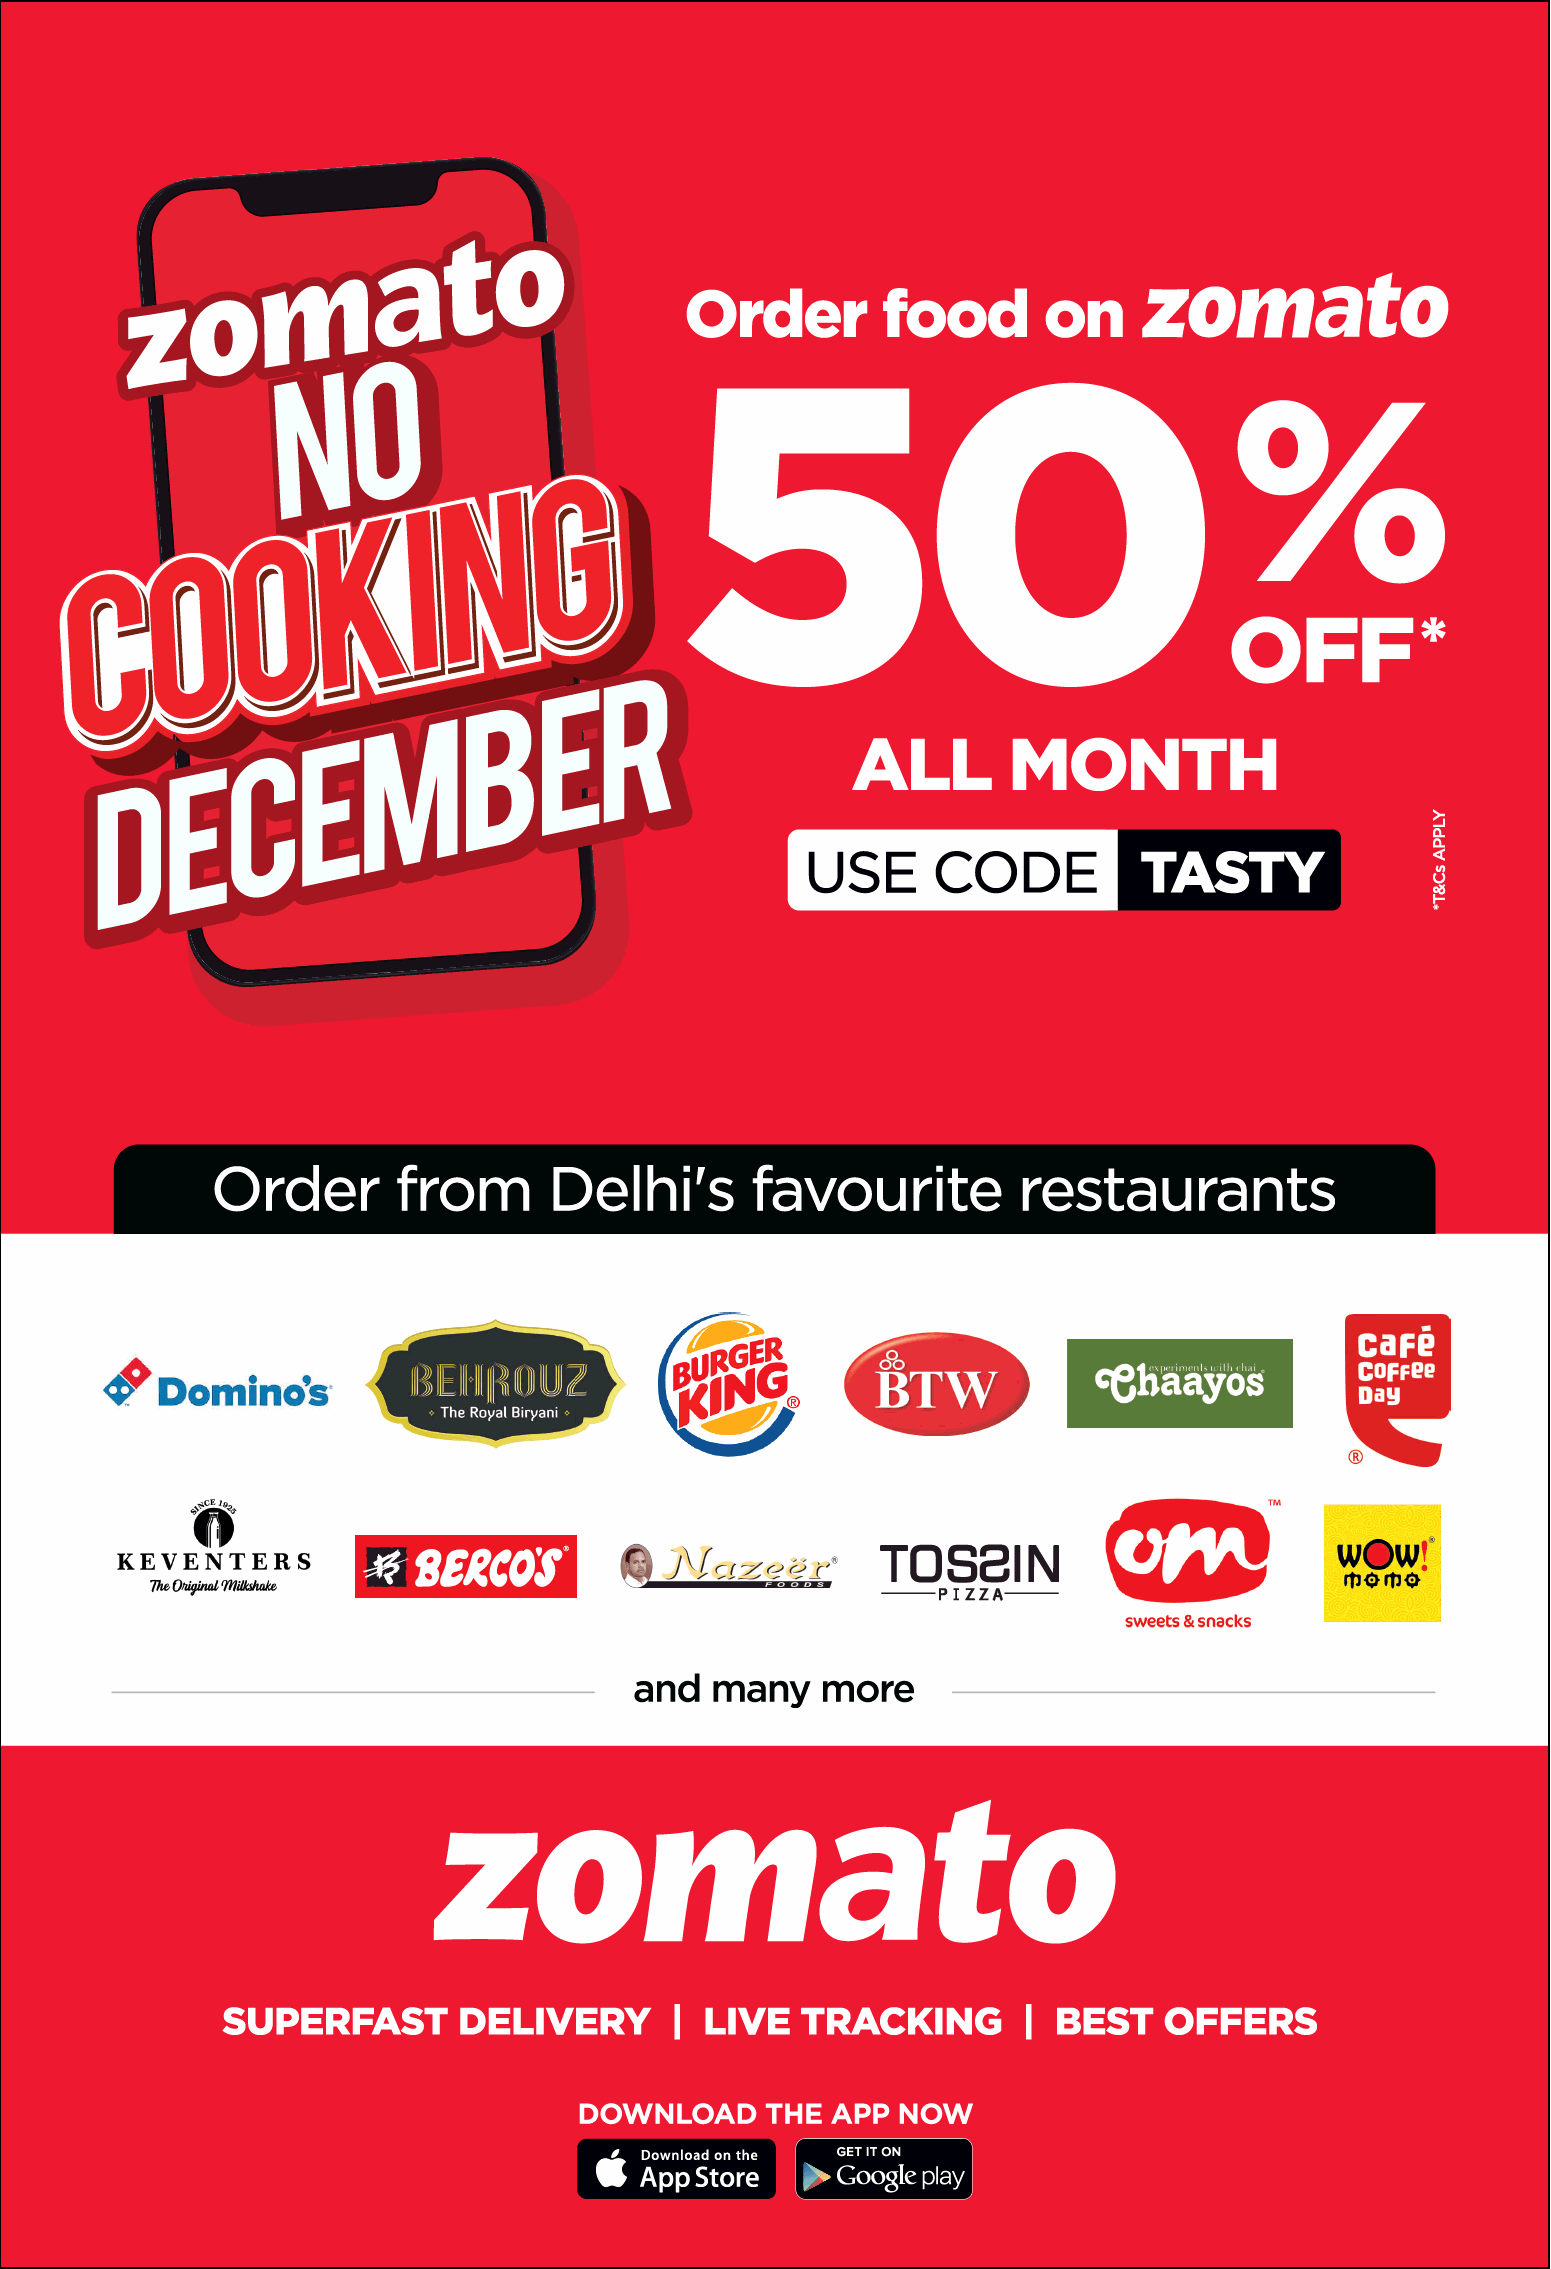 zomato-no-cooking-december-order-food-on-zomato-50%-off-all-month-use-code-tasty-ad-times-of-india-delhi-09-12-2018.png